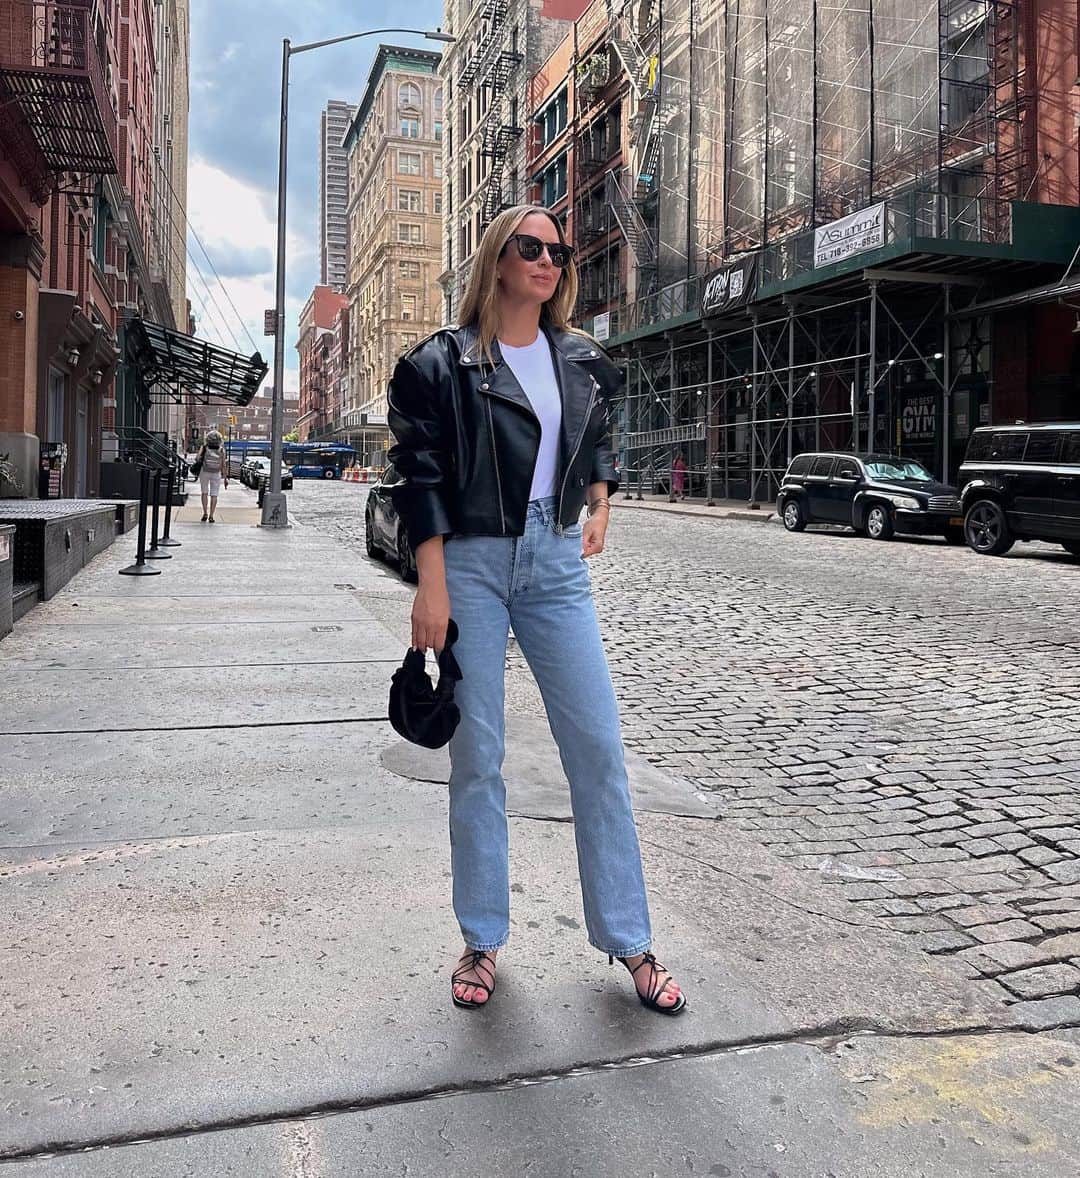 Helena Glazer Hodneのインスタグラム：「D E N I M: an updated denim guide is now up on the blog (linked in my bio). Today, @shopbop launched their big denim campaign and I am rounding up my top favorites from their massive assortment. All details and sizing can be found in the post. #shopbopdenim #shopboppartner」